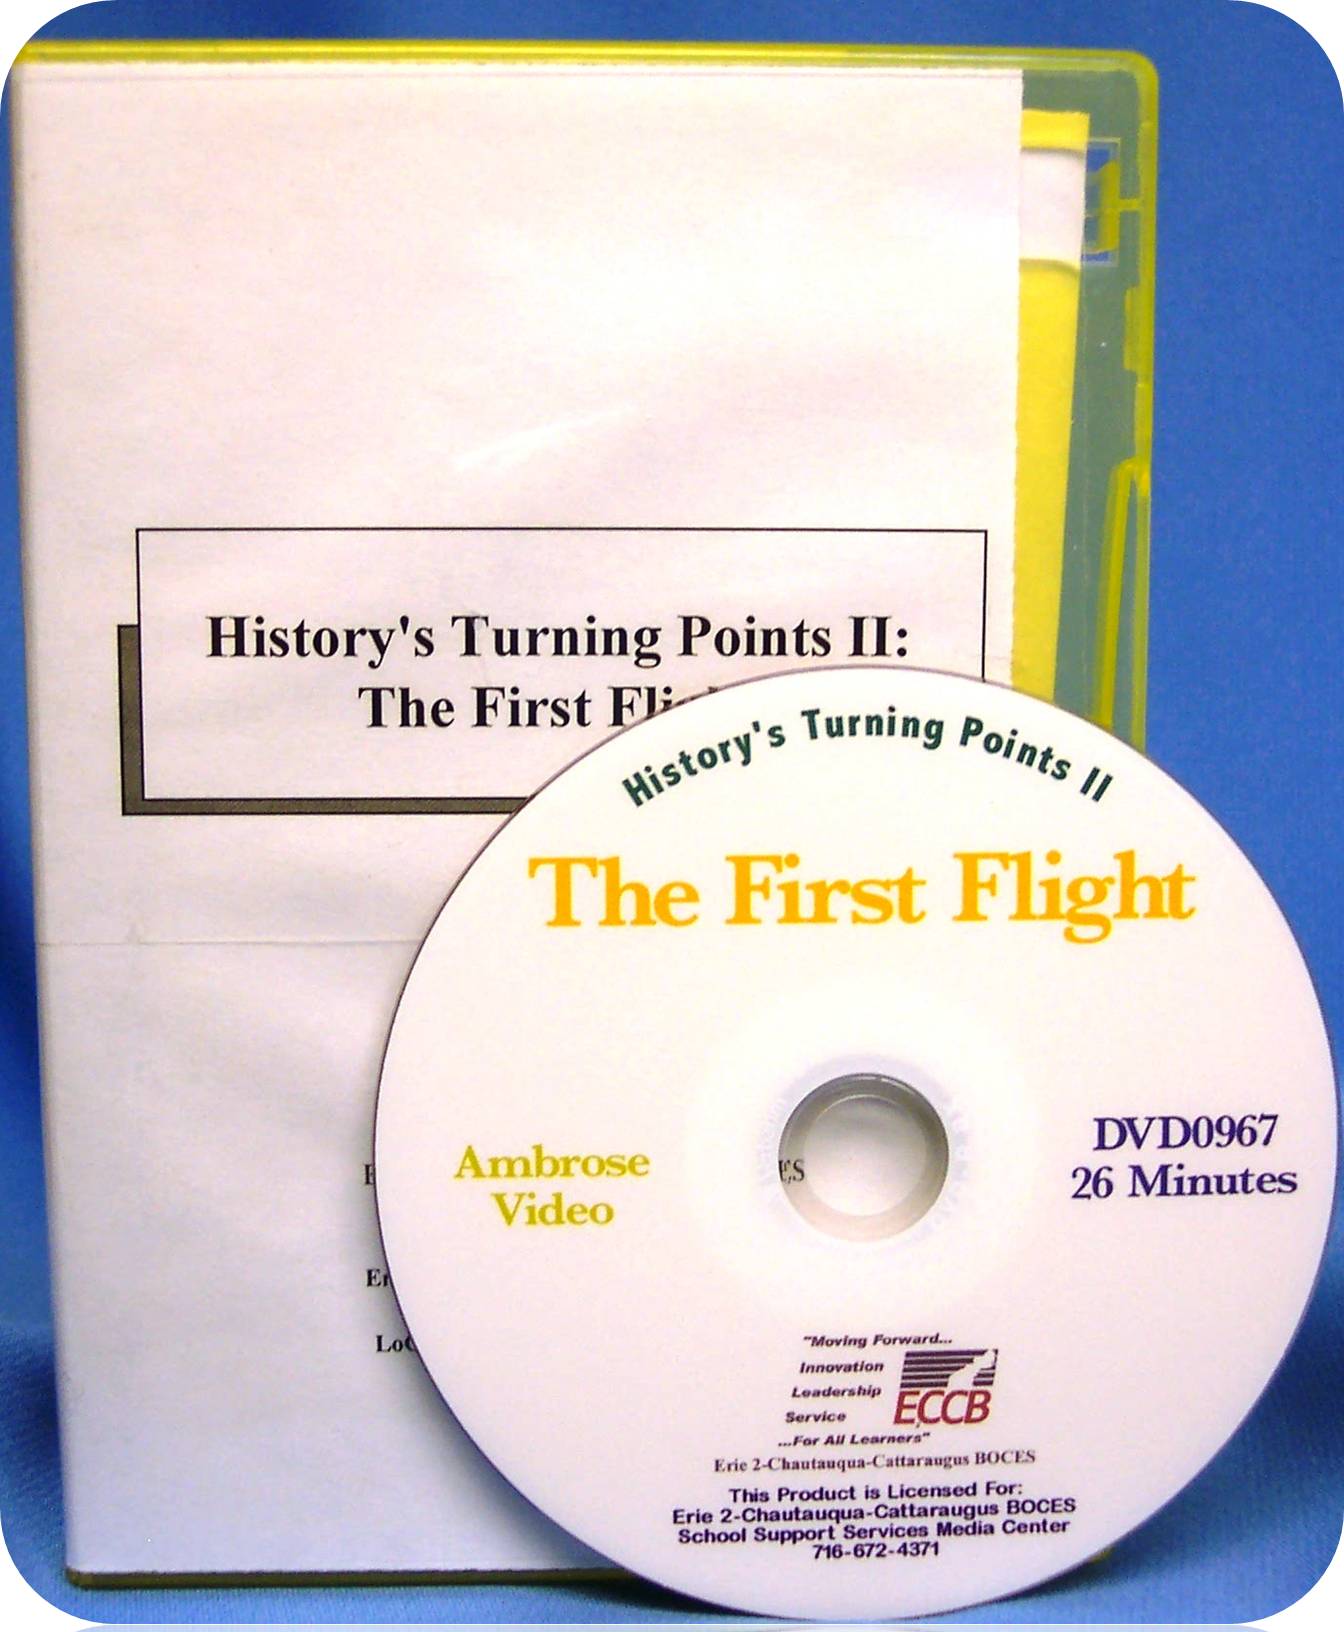 History's Turning Points II: The First Flight